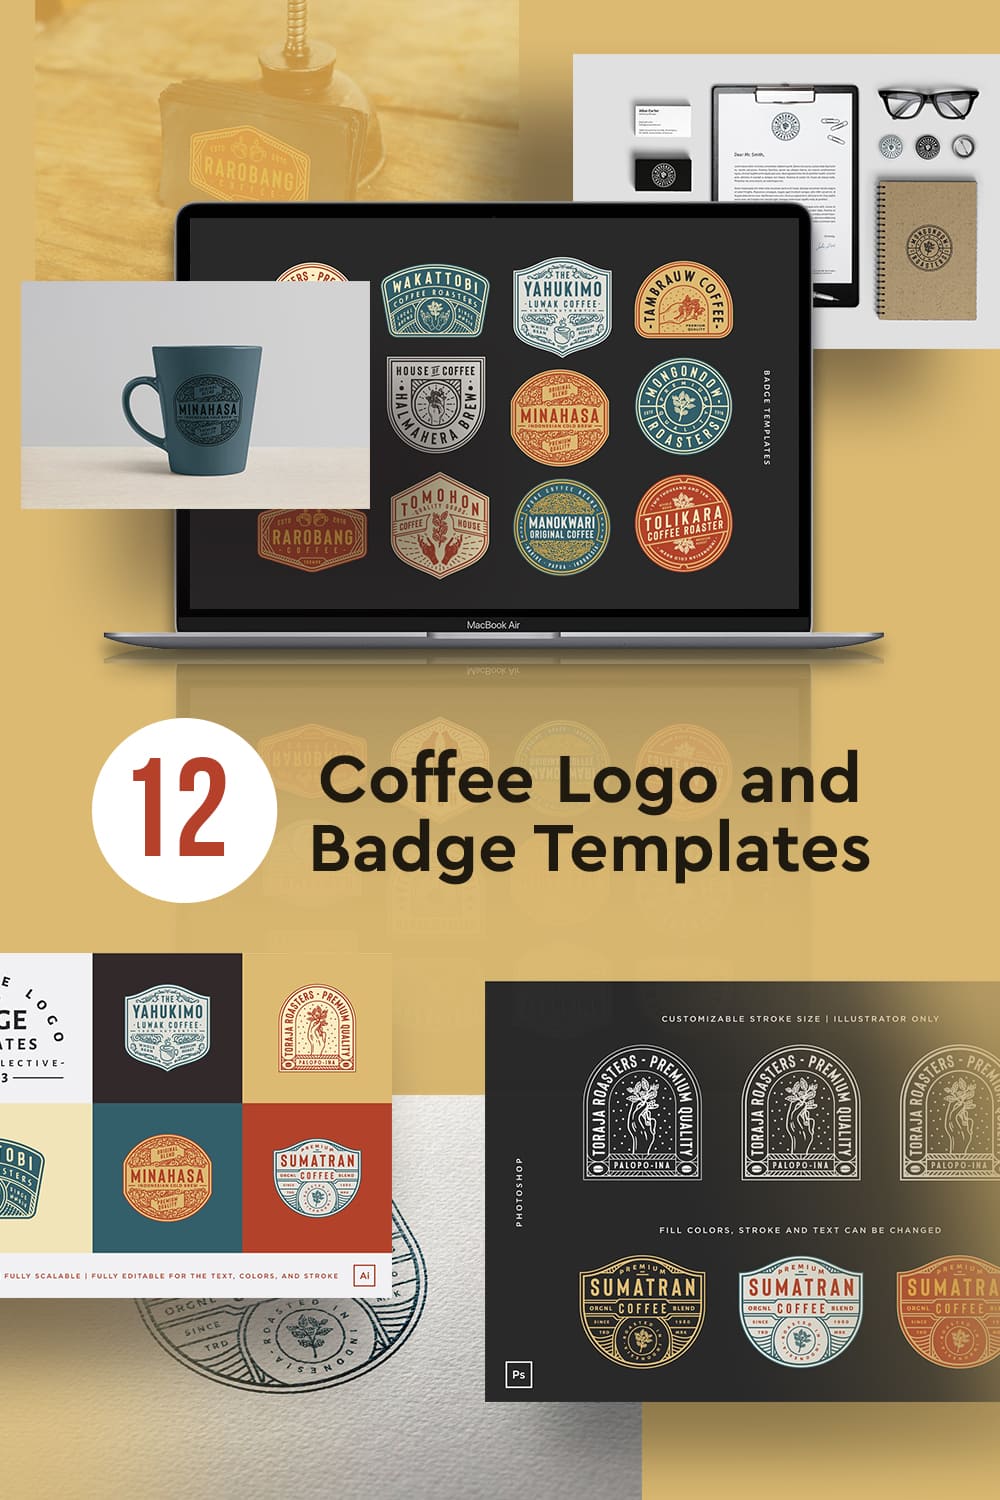 12 coffee logo and badge templates pinterest image.